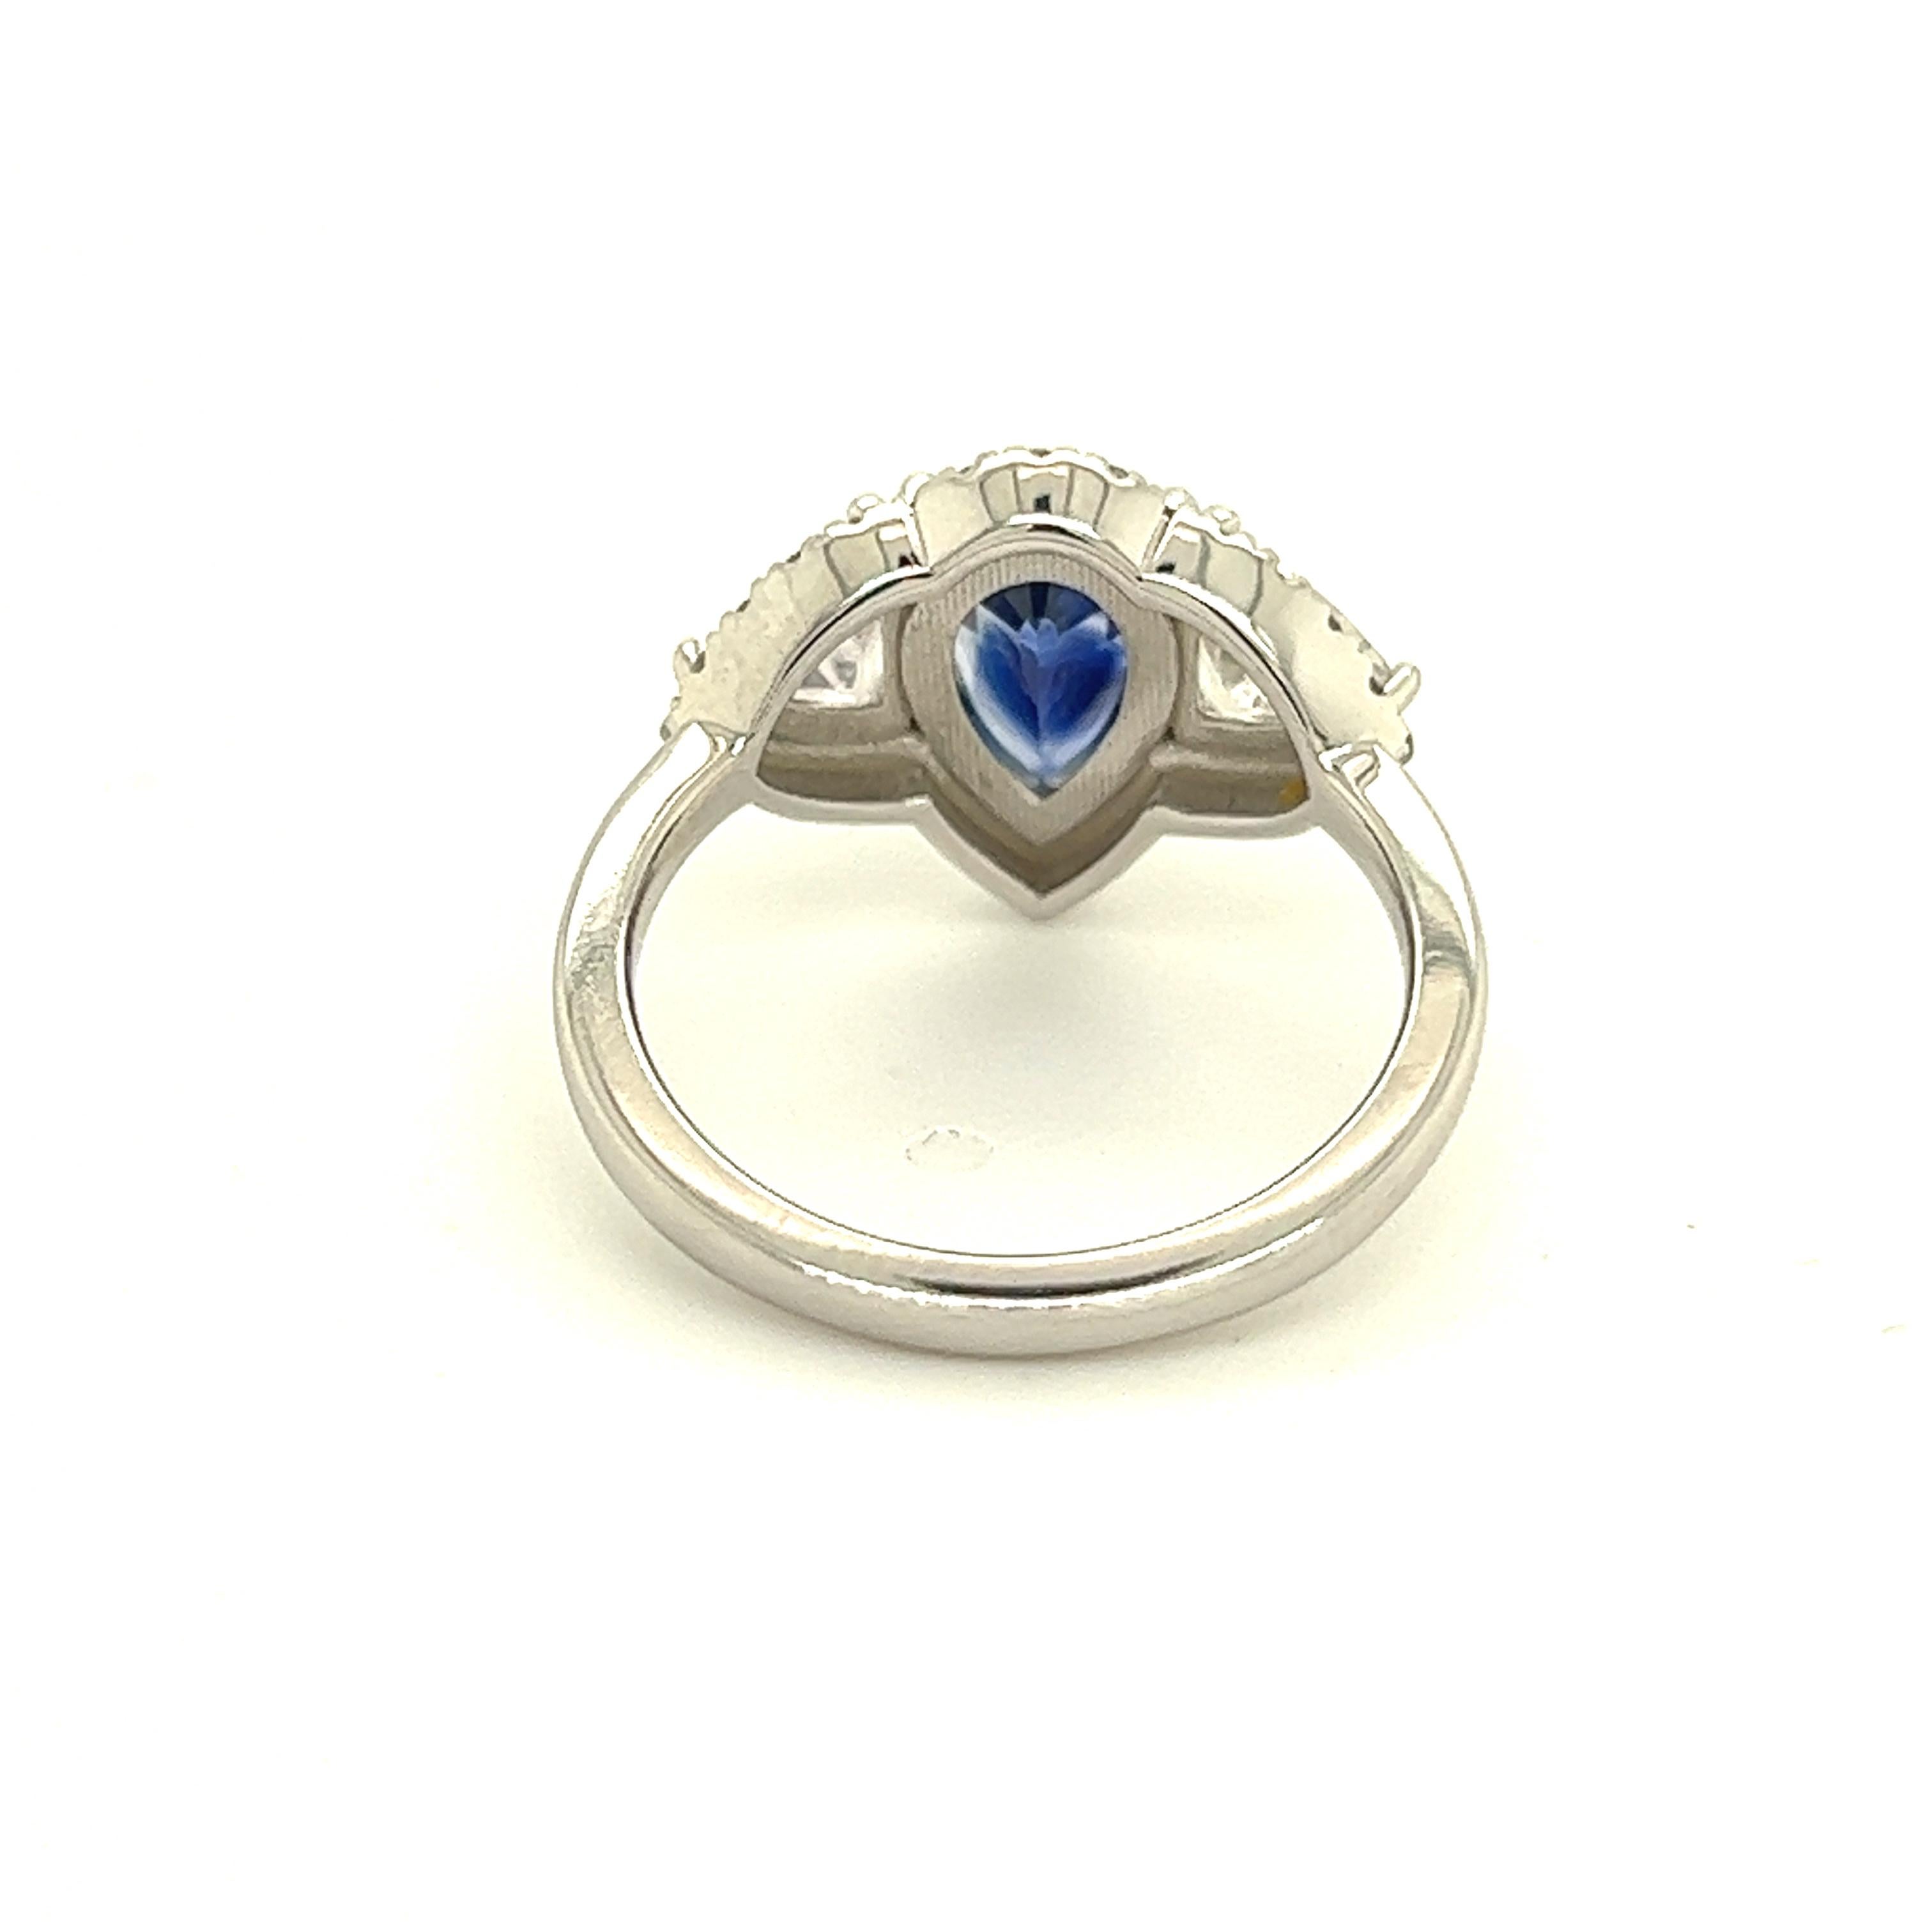 Natural Sapphire Diamond Ring 14k W Gold 2.78 TCW Certified For Sale 4